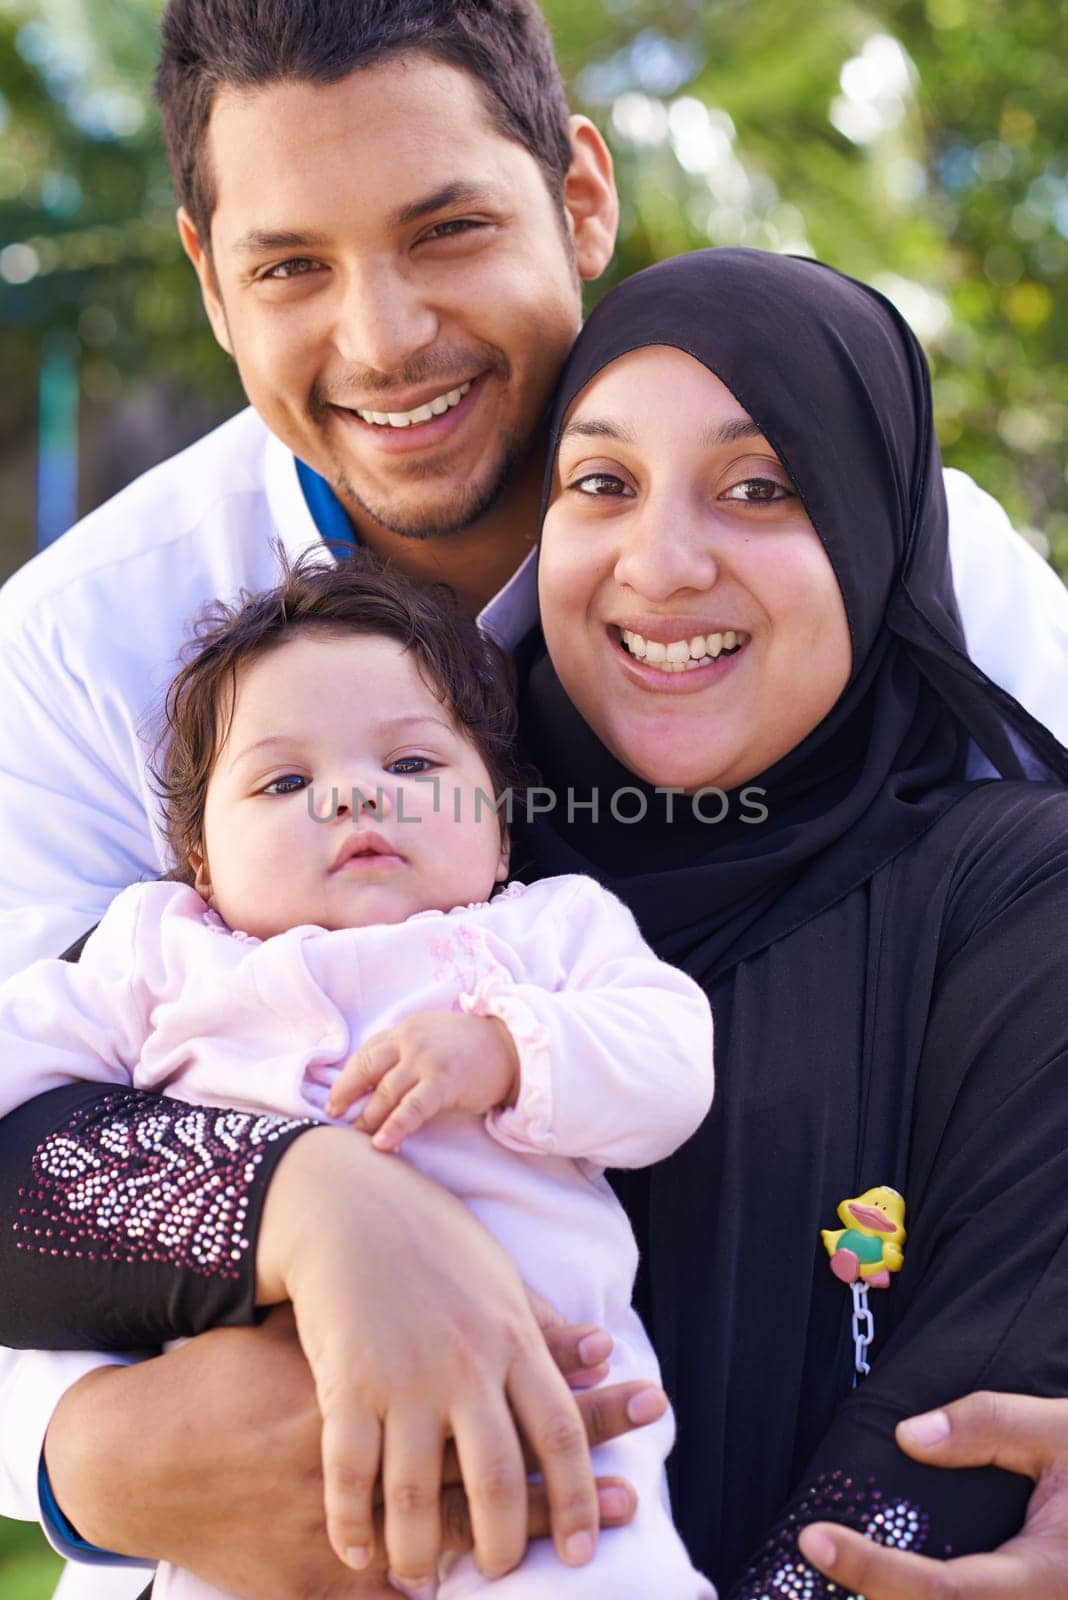 Muslim, park and portrait of parents with baby for bonding, ramadan and outdoors together. Islam, happy family and mother, father and newborn infant for love, childcare and support in garden.